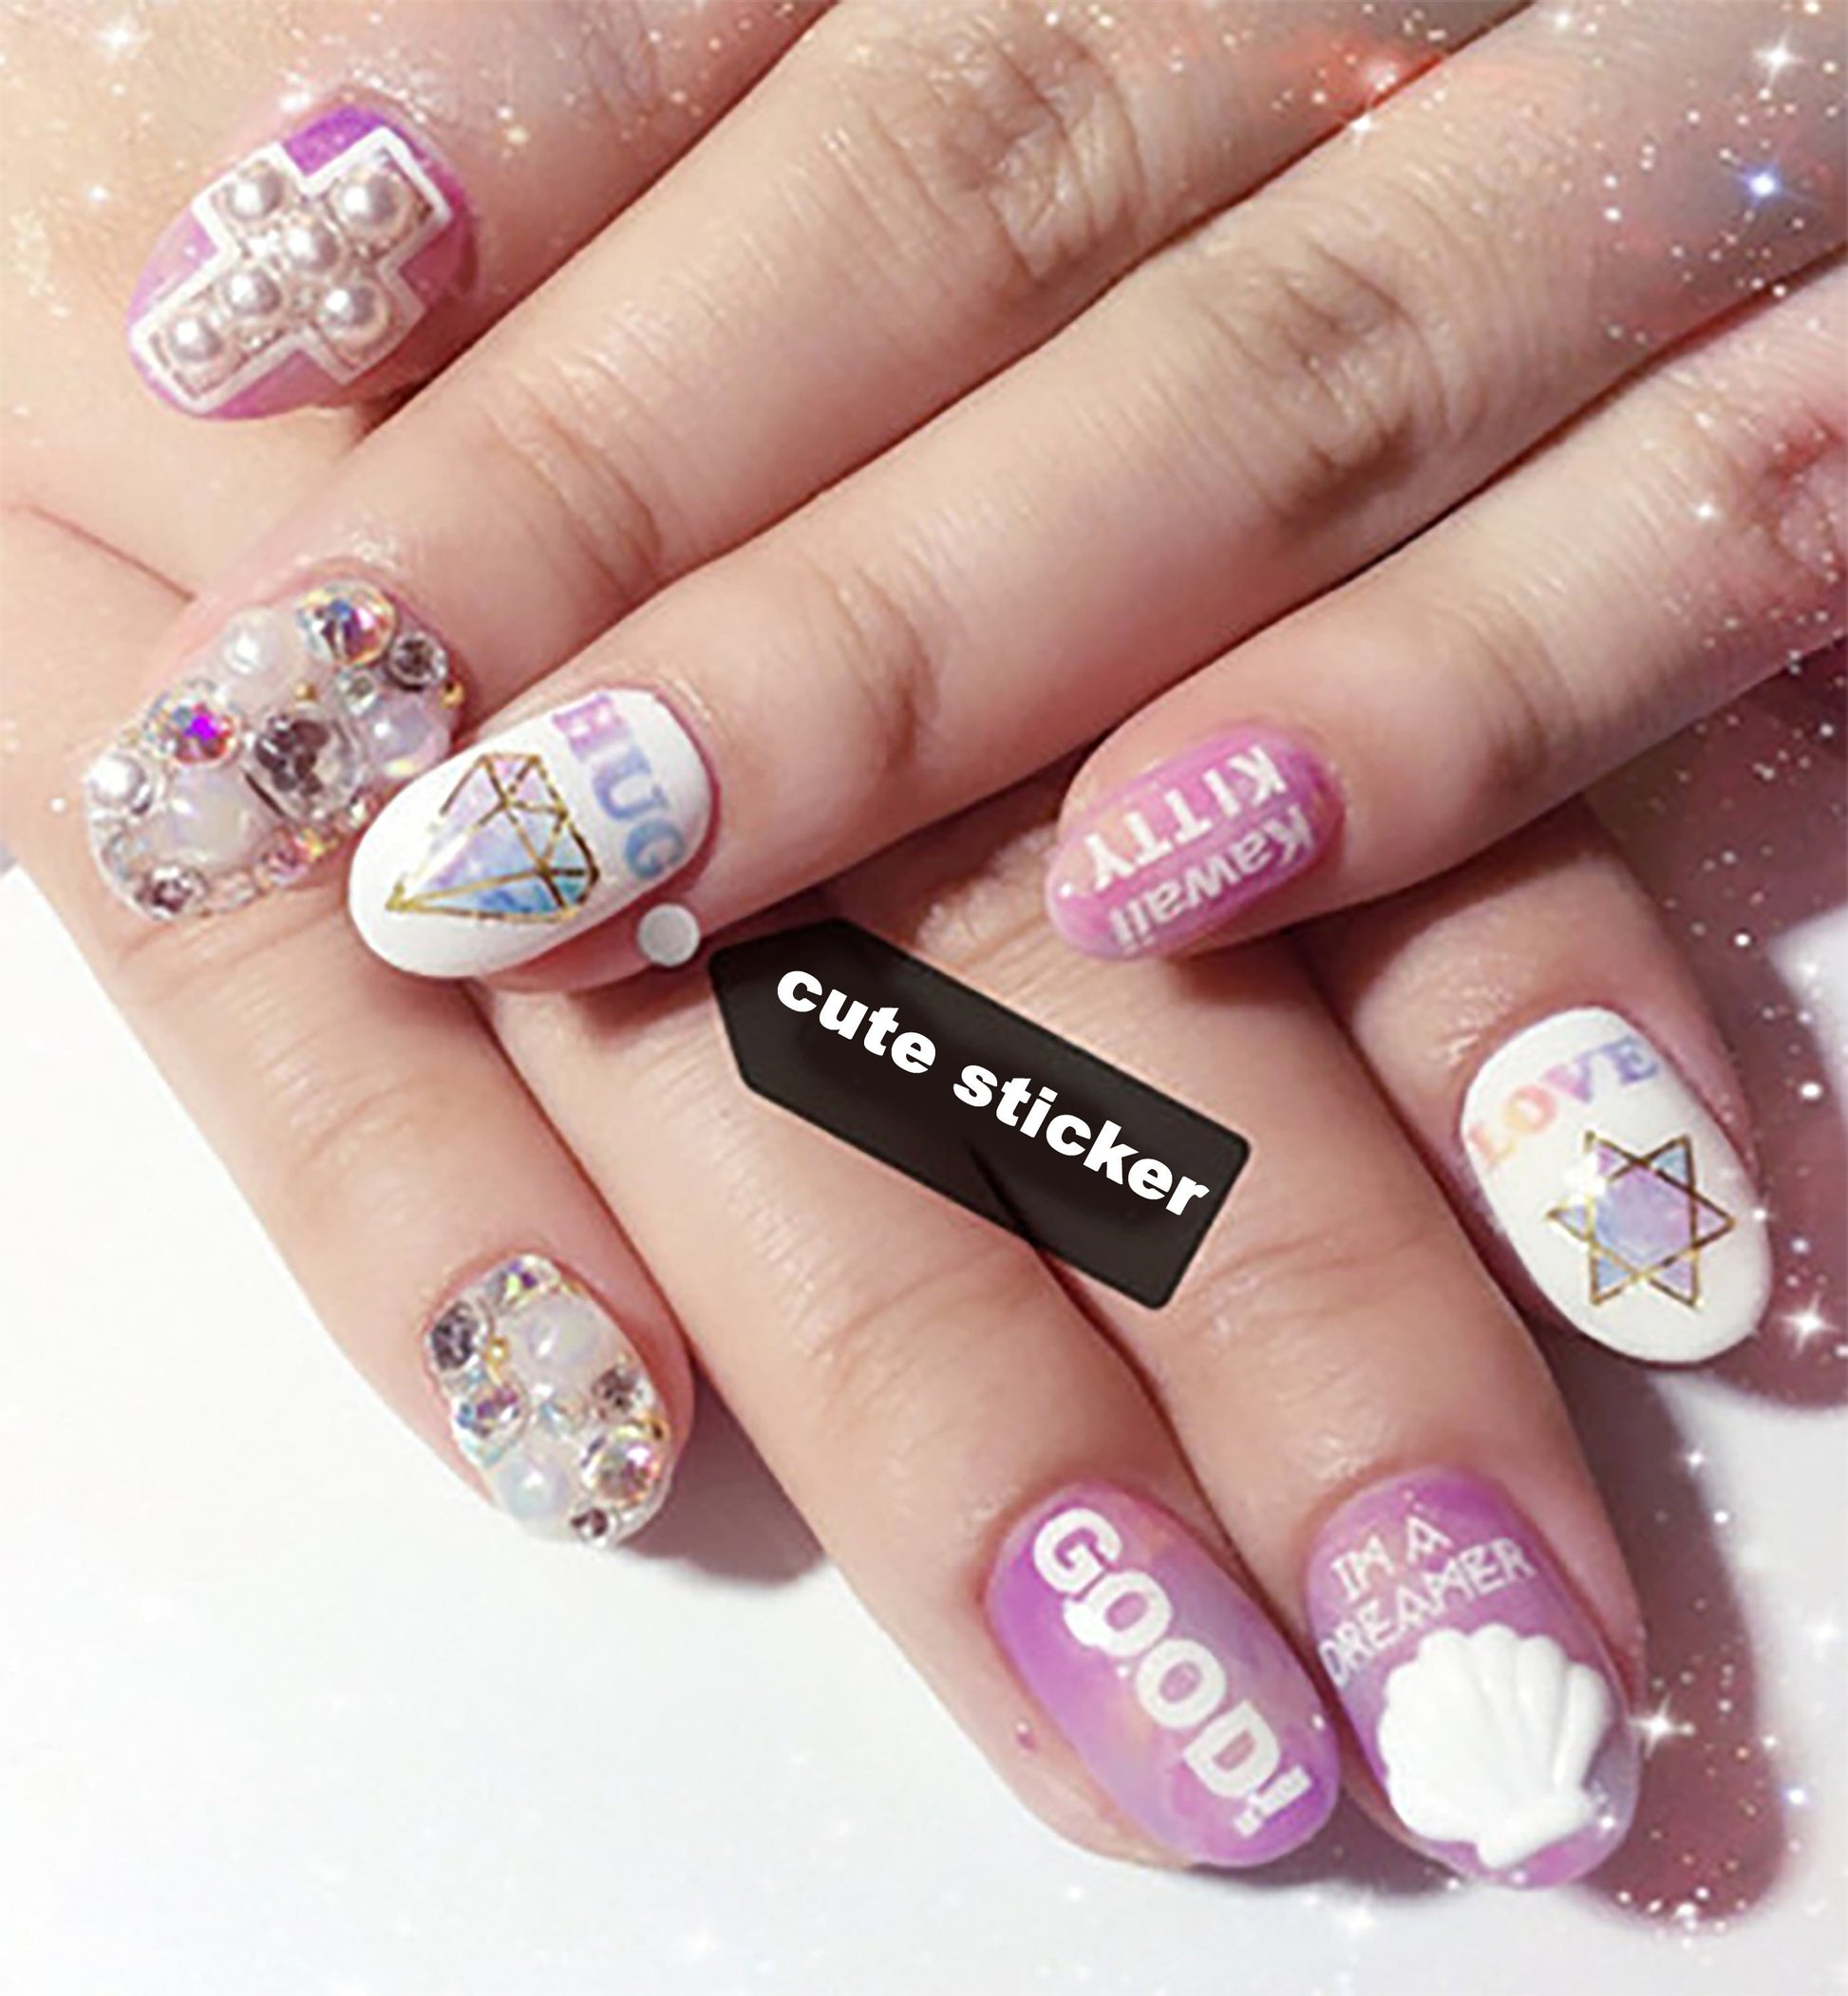 Totem Pinky gradient nail sticker/Star Moon Unicorn 1 Sheet 3D Nail Art Stickers Self Adhesive Decals/ Cross and heart nails decal